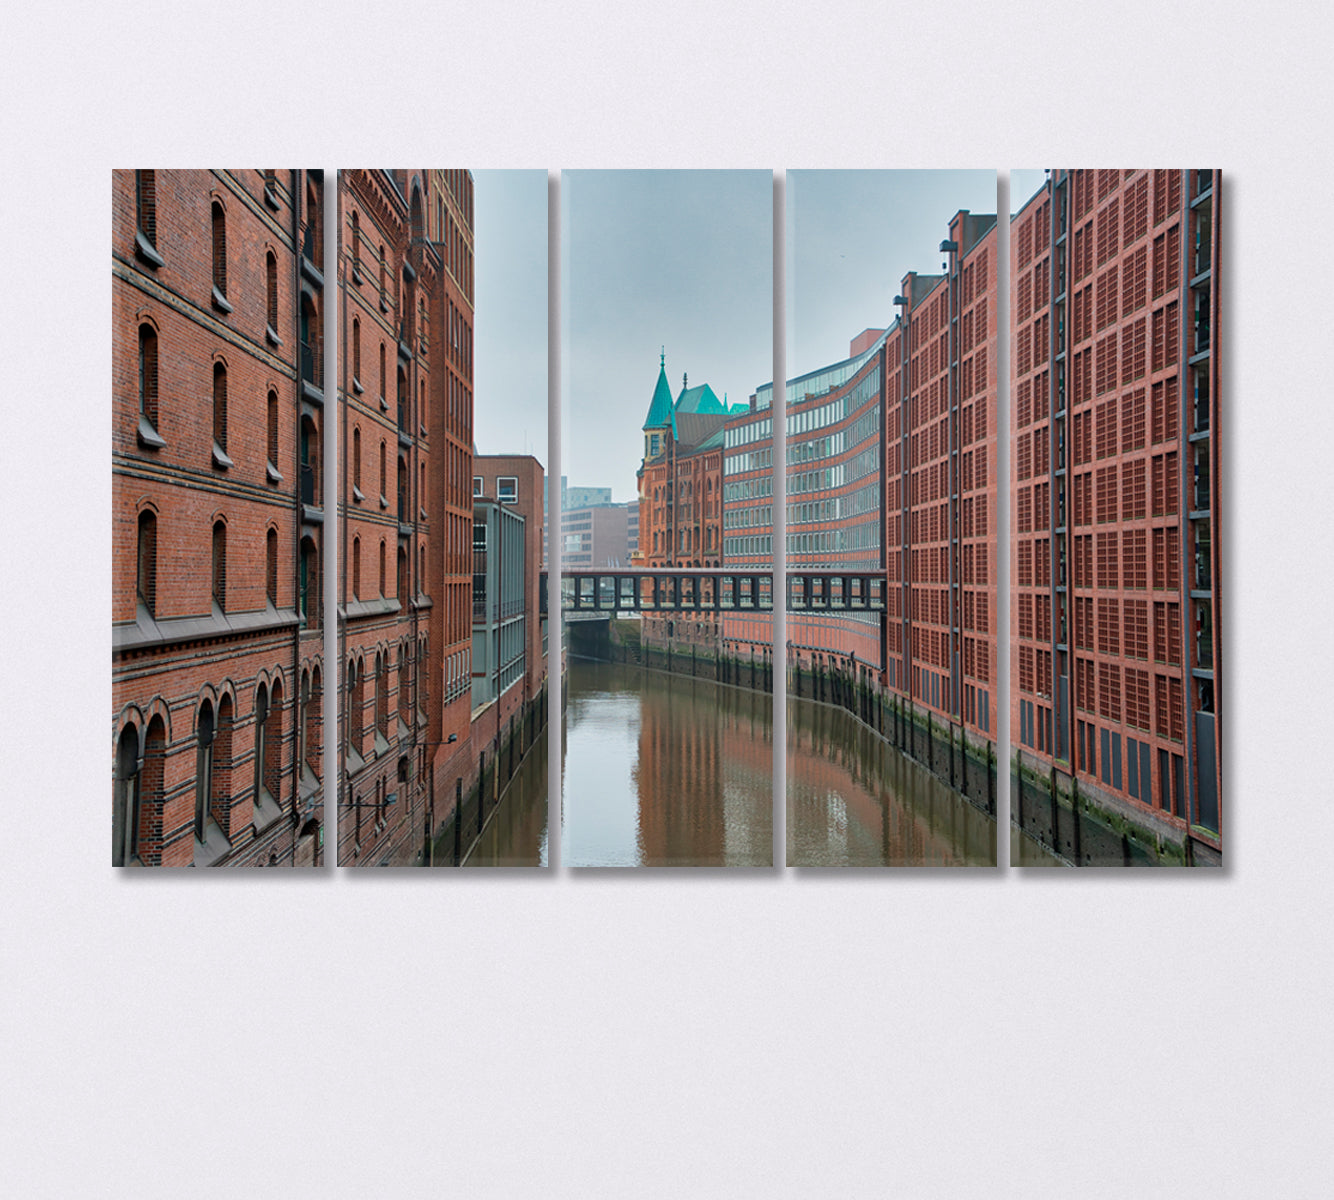 The Canals of Hamburg on the Elbe River Canvas Print-Canvas Print-CetArt-5 Panels-36x24 inches-CetArt